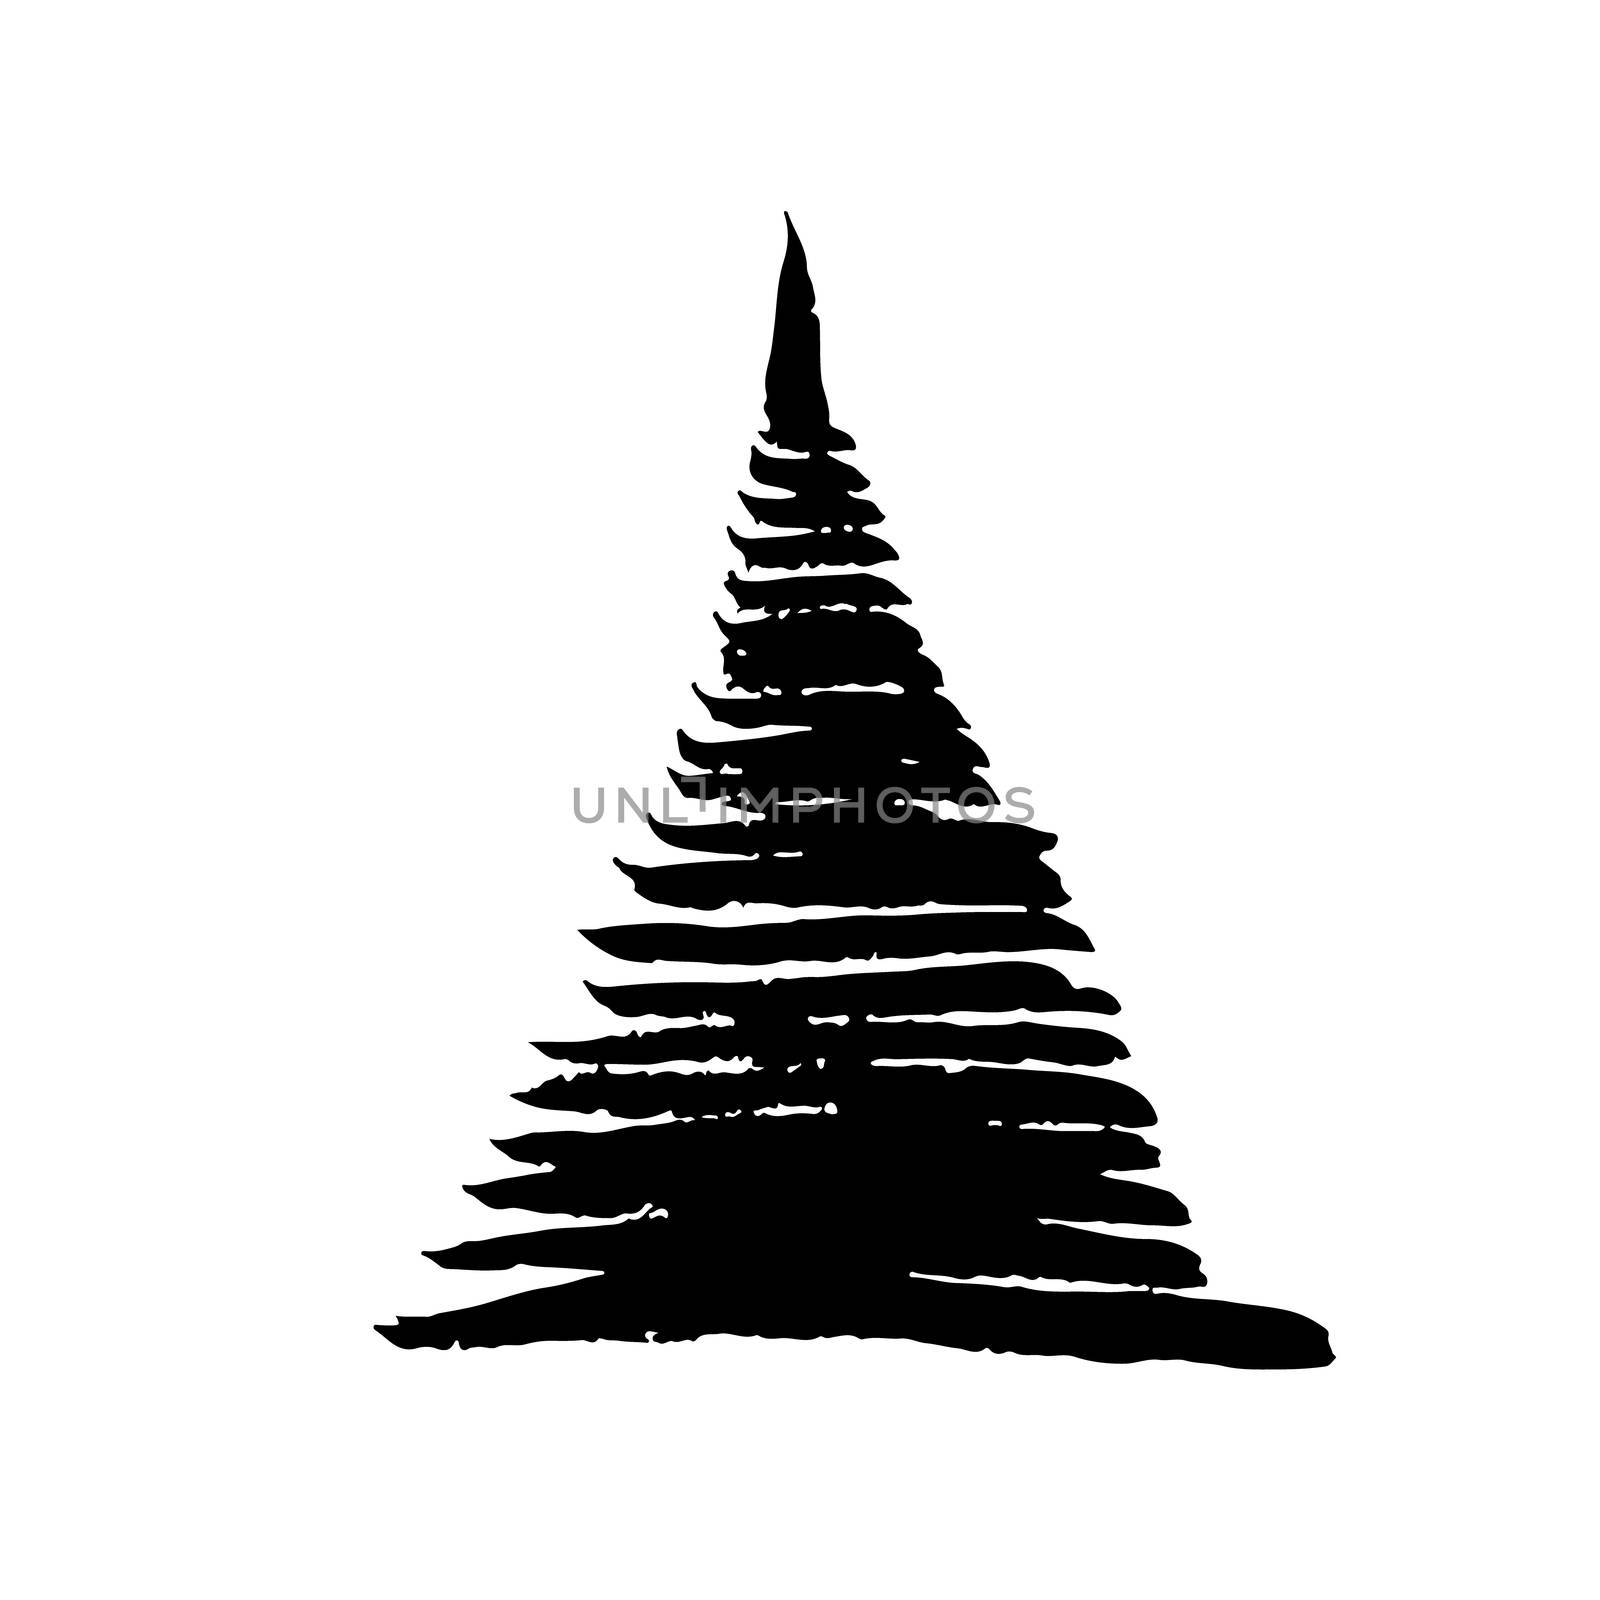 hand drawn Christmas tree doodle design isolated on a white background